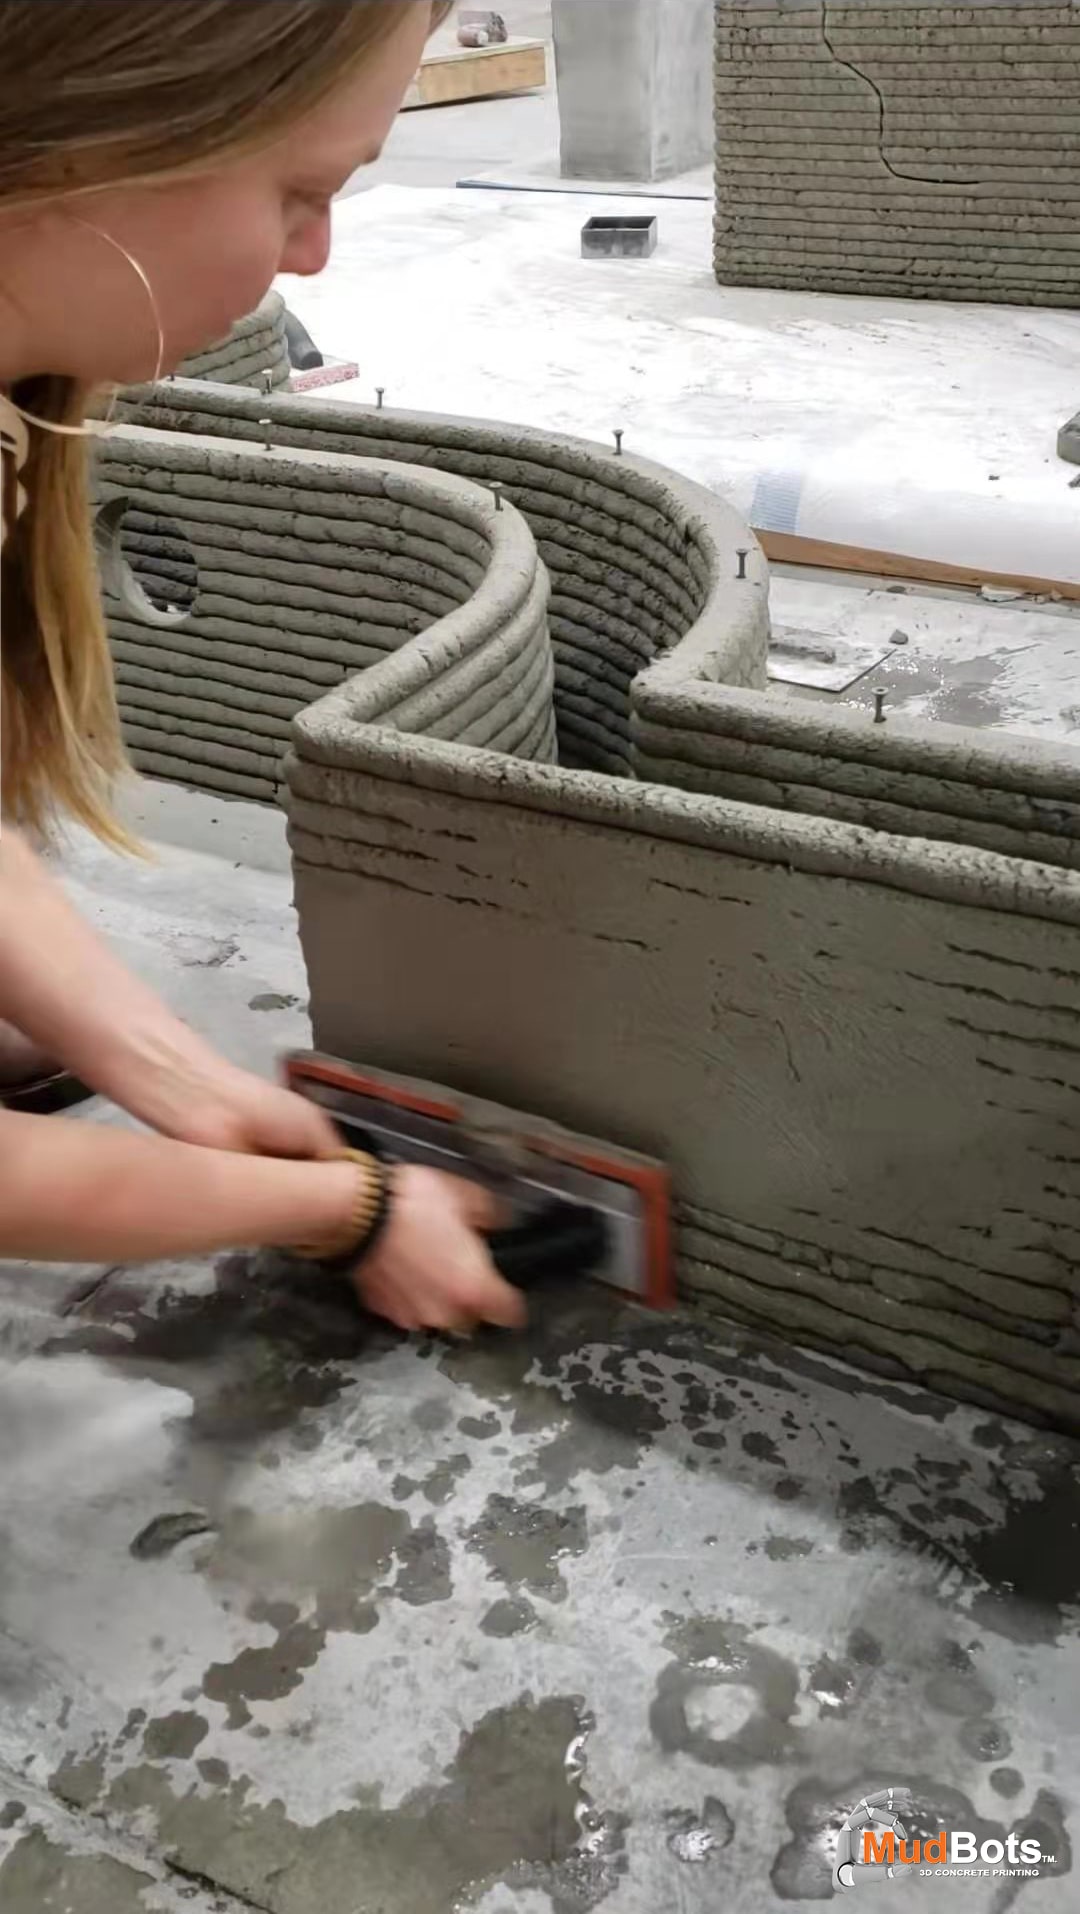 Prepare to get down and dirty, do everything by yourself. Our concrete printing machine is so easy to operate, you can do it all by yourself. Request DIY tips and tricks from one of our staff when you visit our facility.